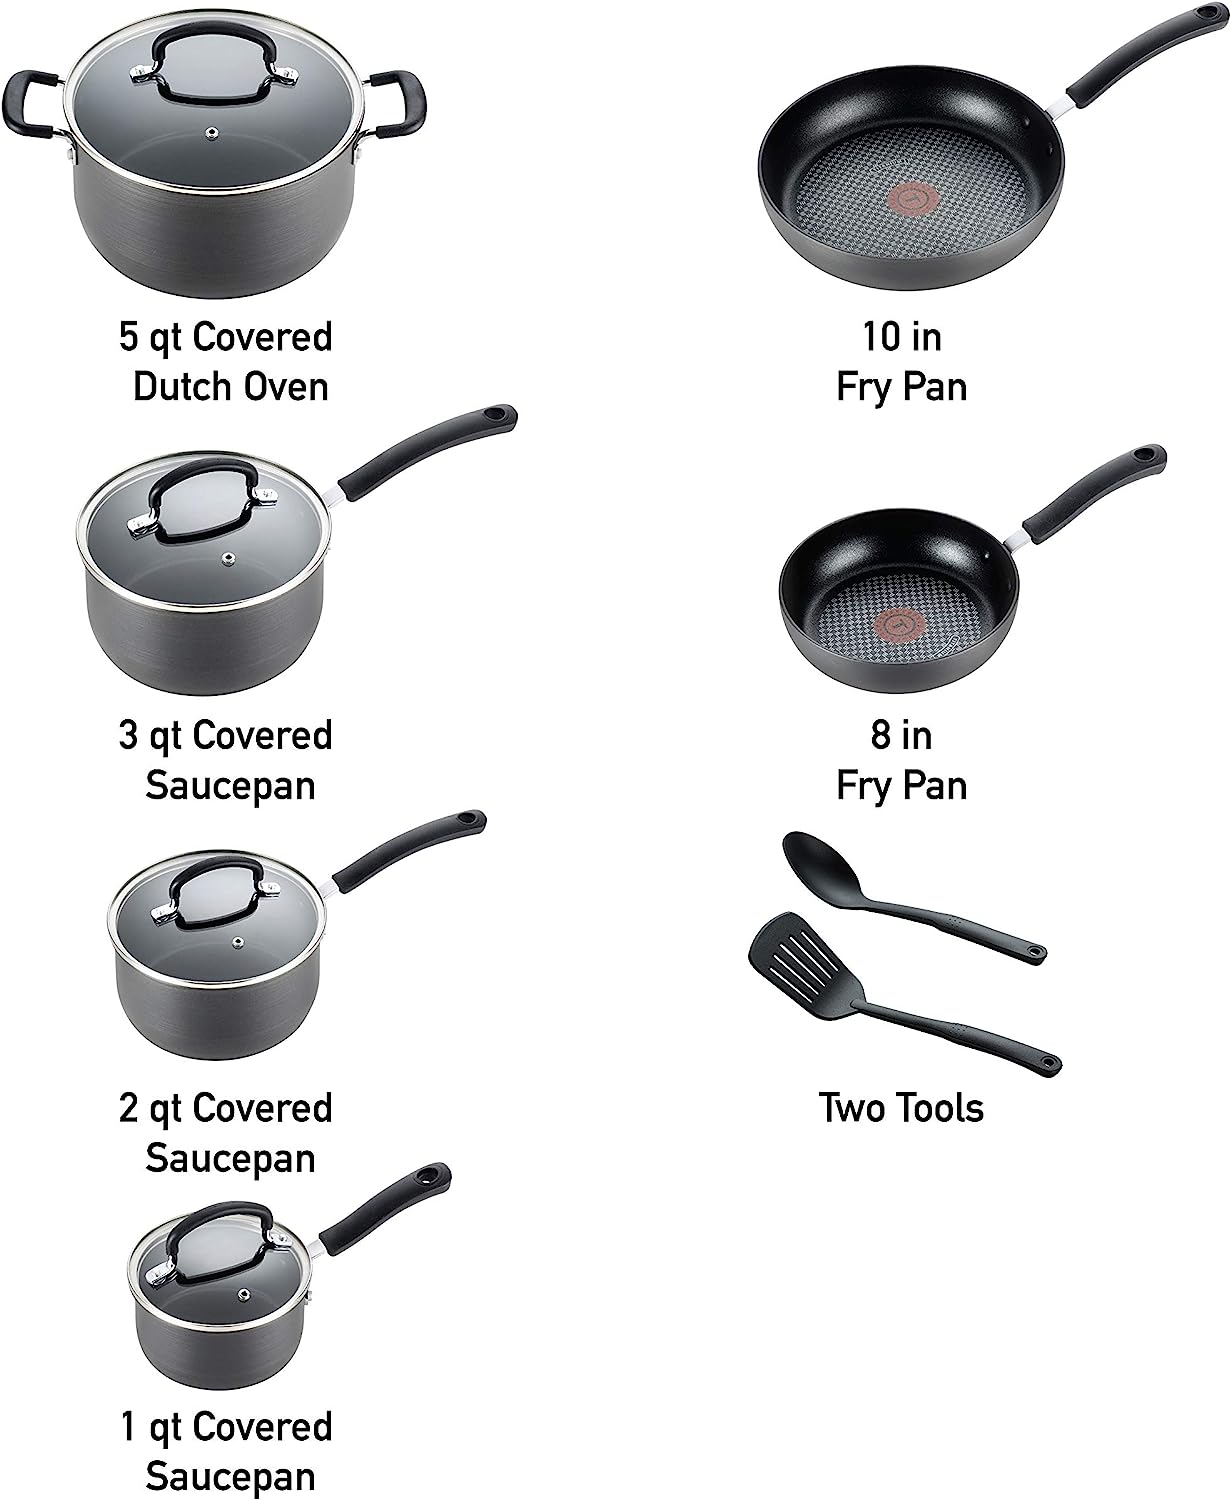 T-fal Dishwasher Safe Cookware Fry Pan with Lid Hard Anodized Titanium  Nonstick, 12-Inch, Black 